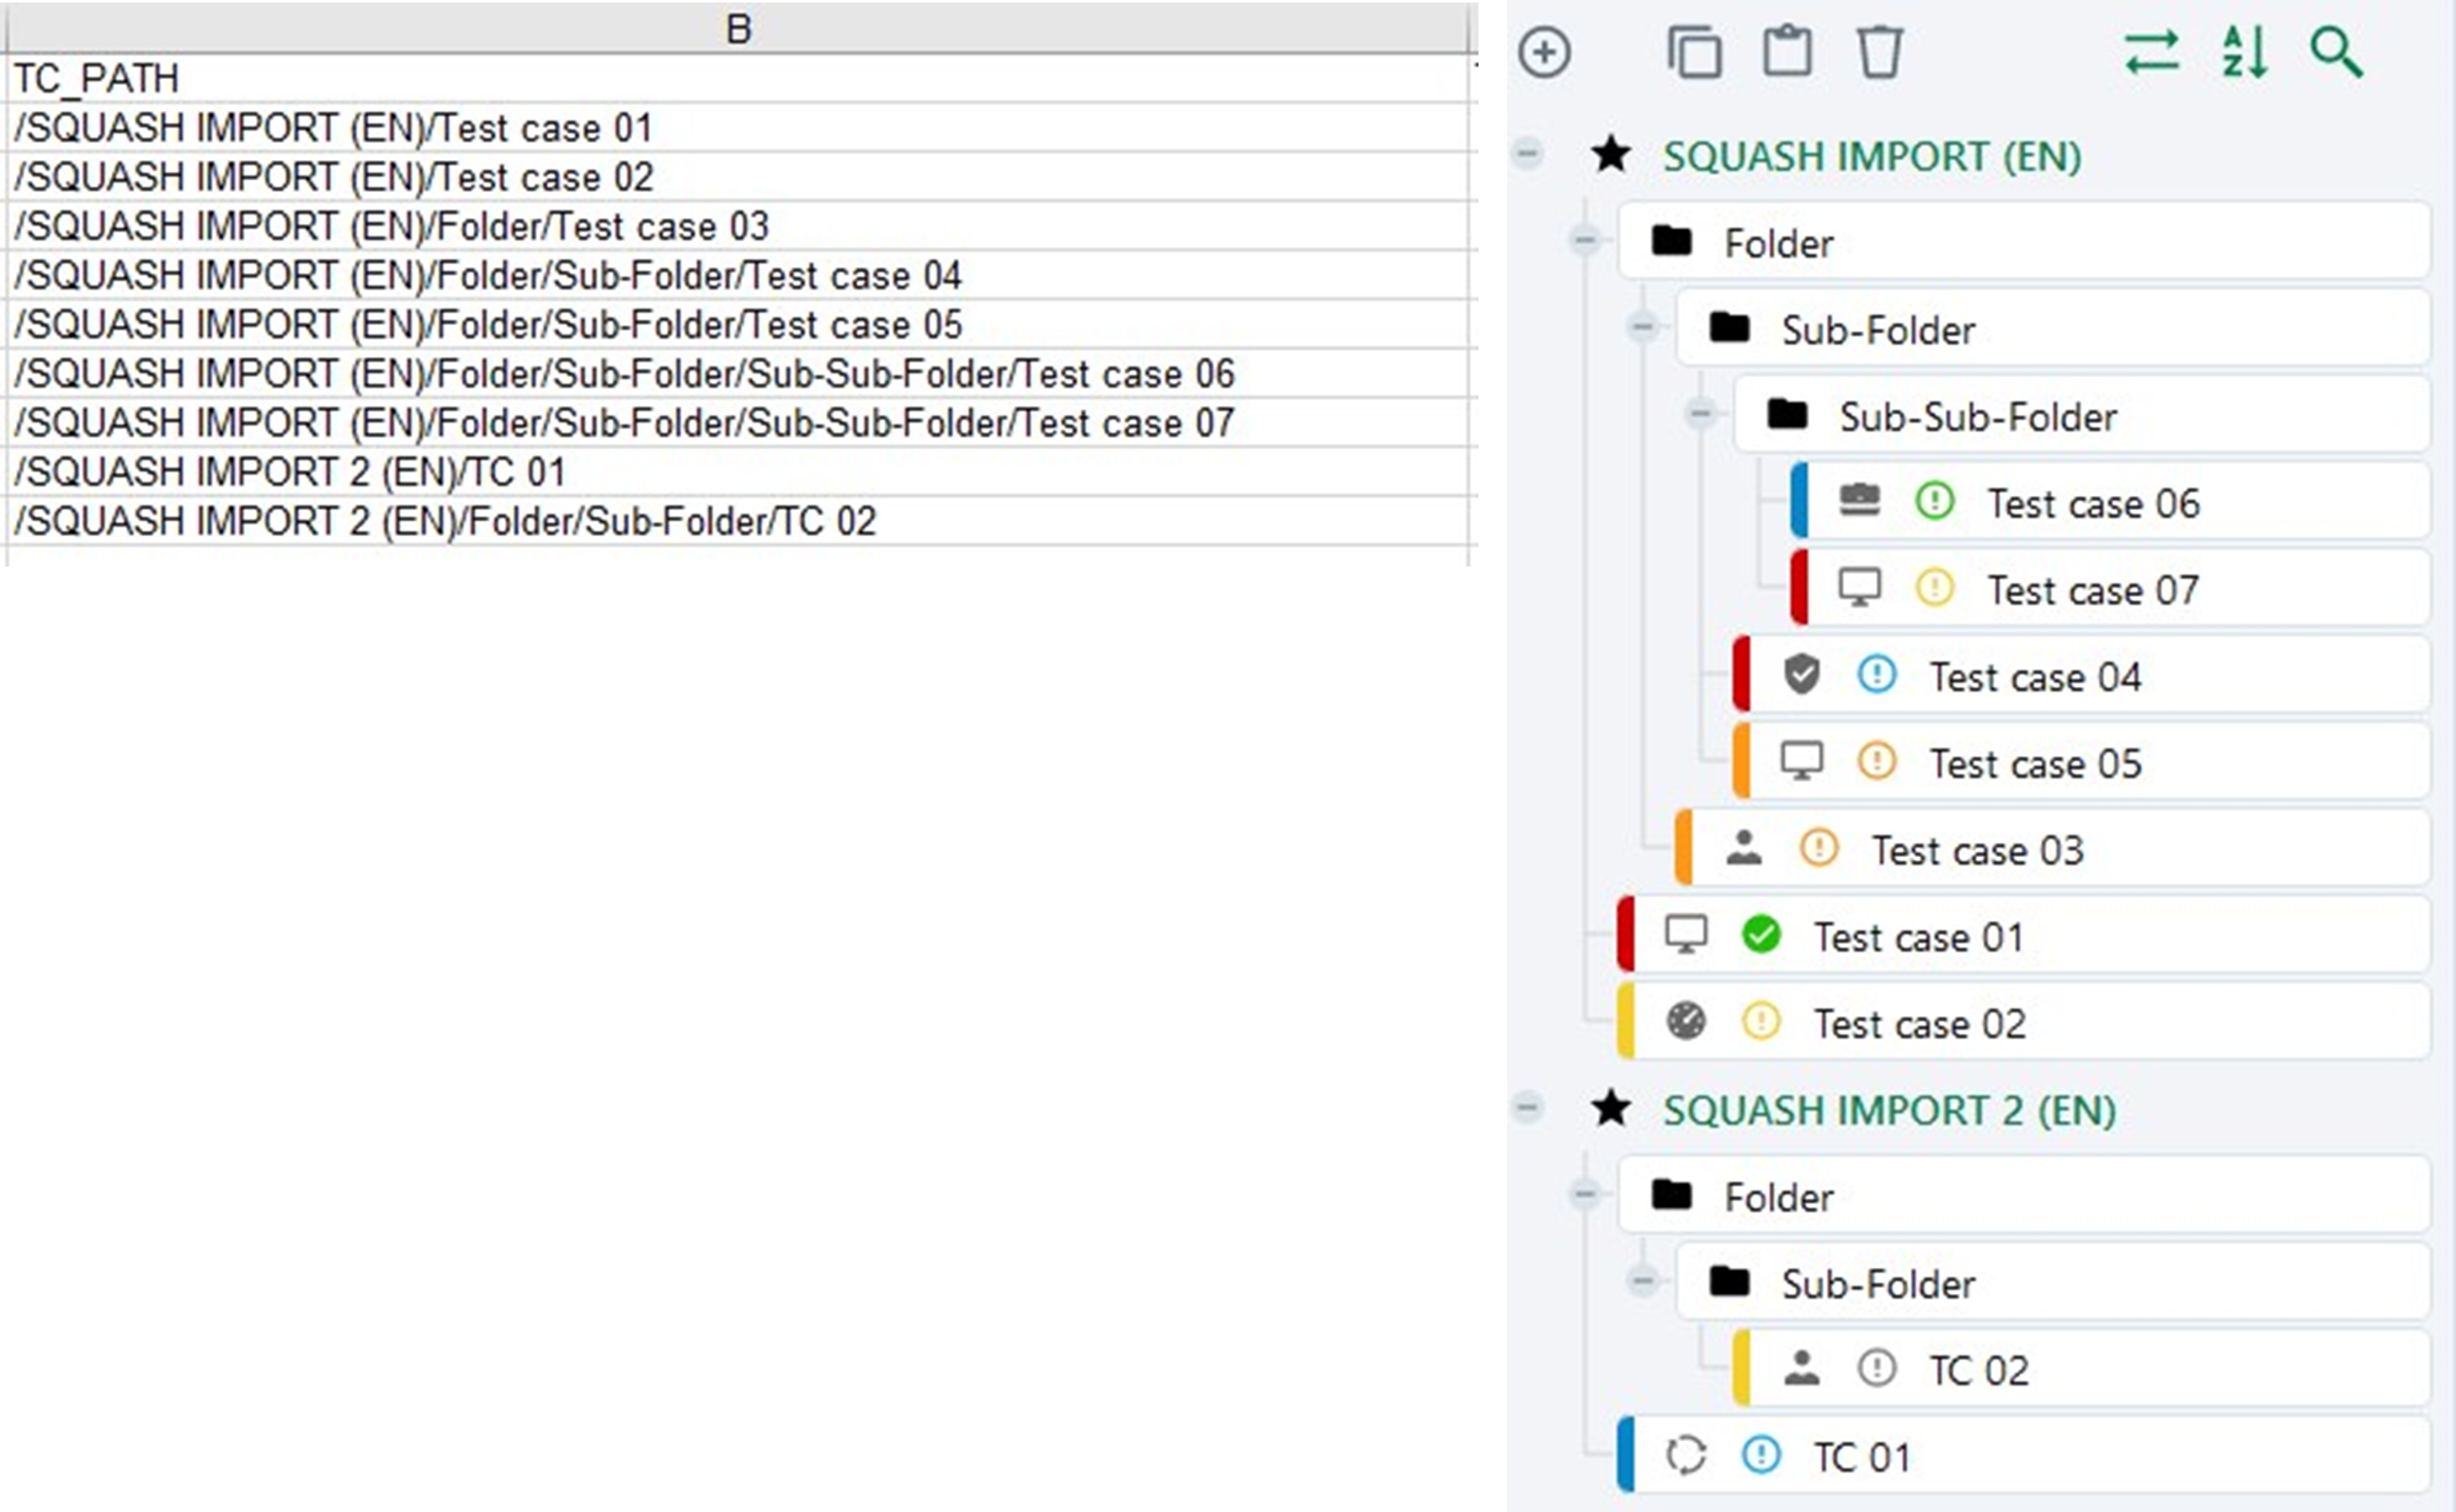 Importing a tree of test cases